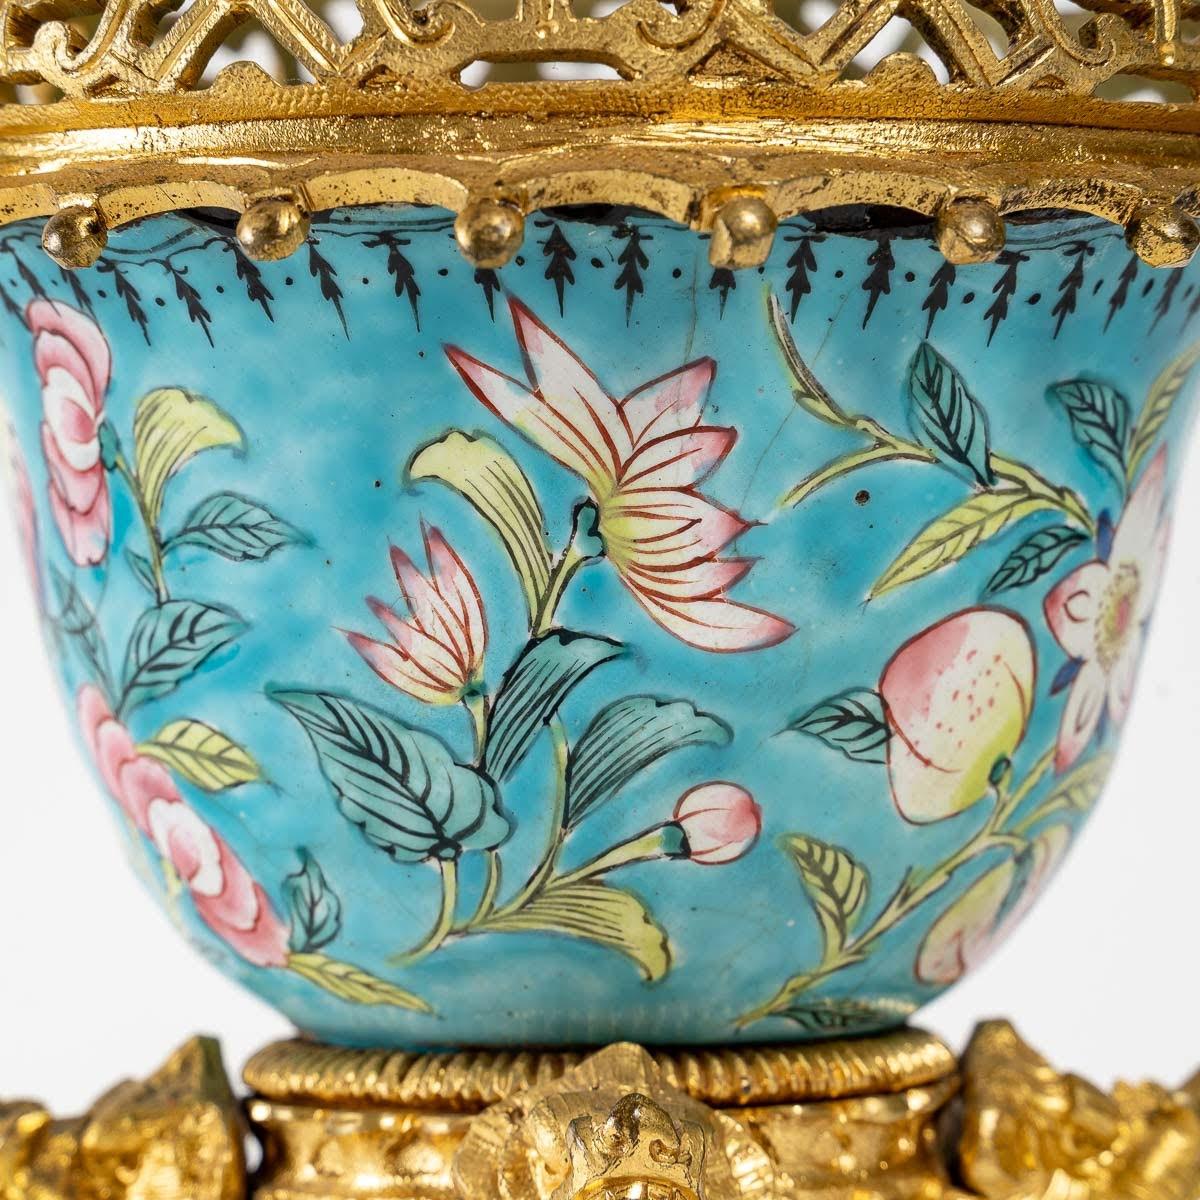 Asian Art Porcelain and Chased and Gilt Bronze Bowl, 19th Century. For Sale 3